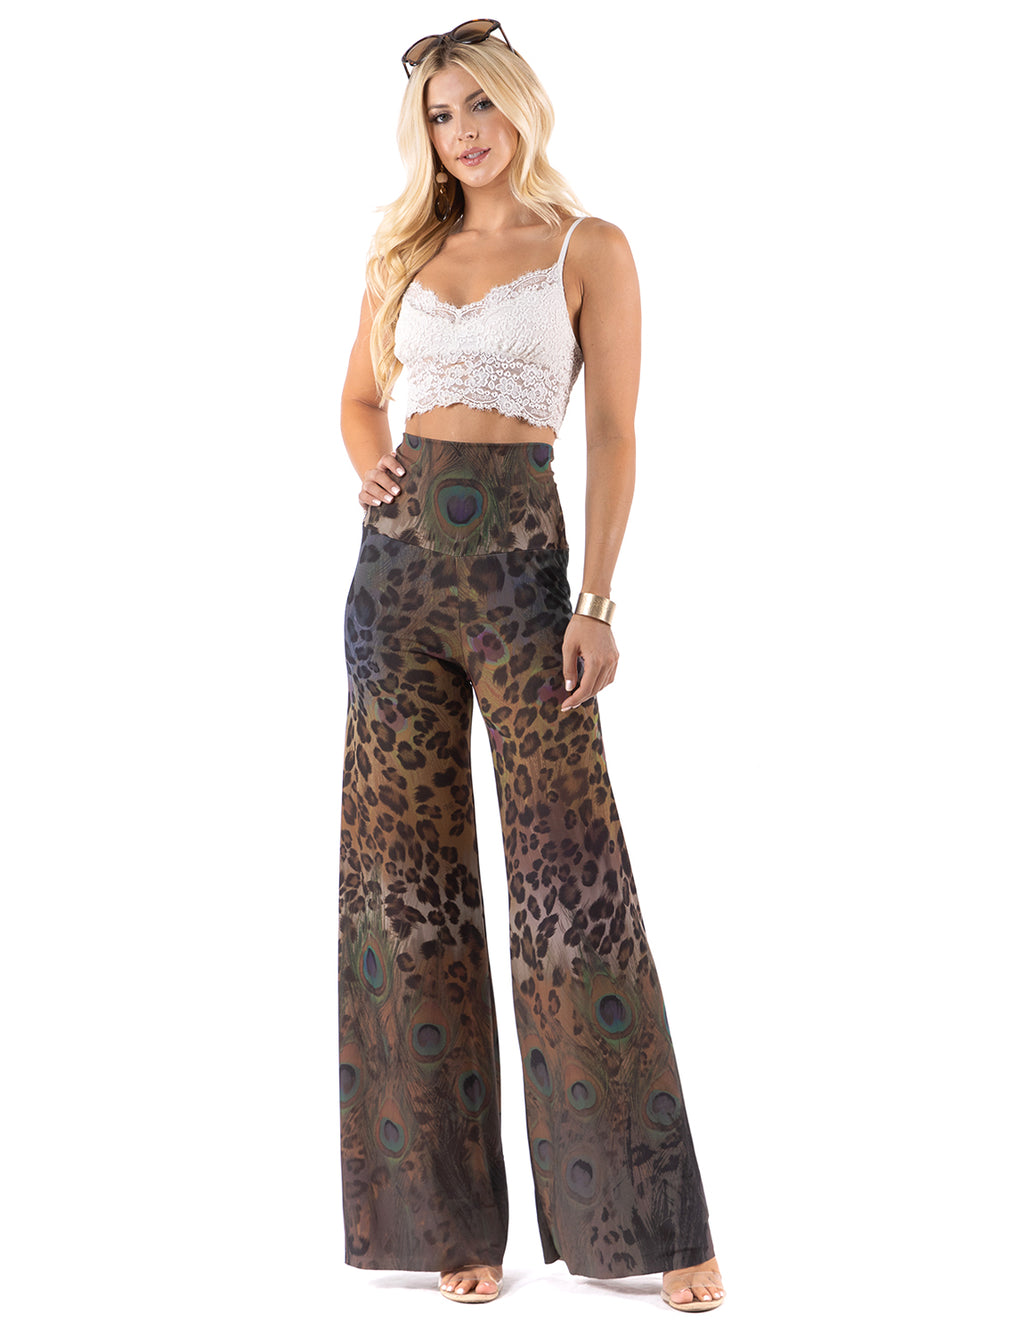 Beautiful woman wearing this amazing Animal & Feather High waist palazzo pants featuring pockets, wide legs, and a comfortable stretchy fabric,erfect for any activity,relaxing day,beautiful and unique,comfortable and flattering